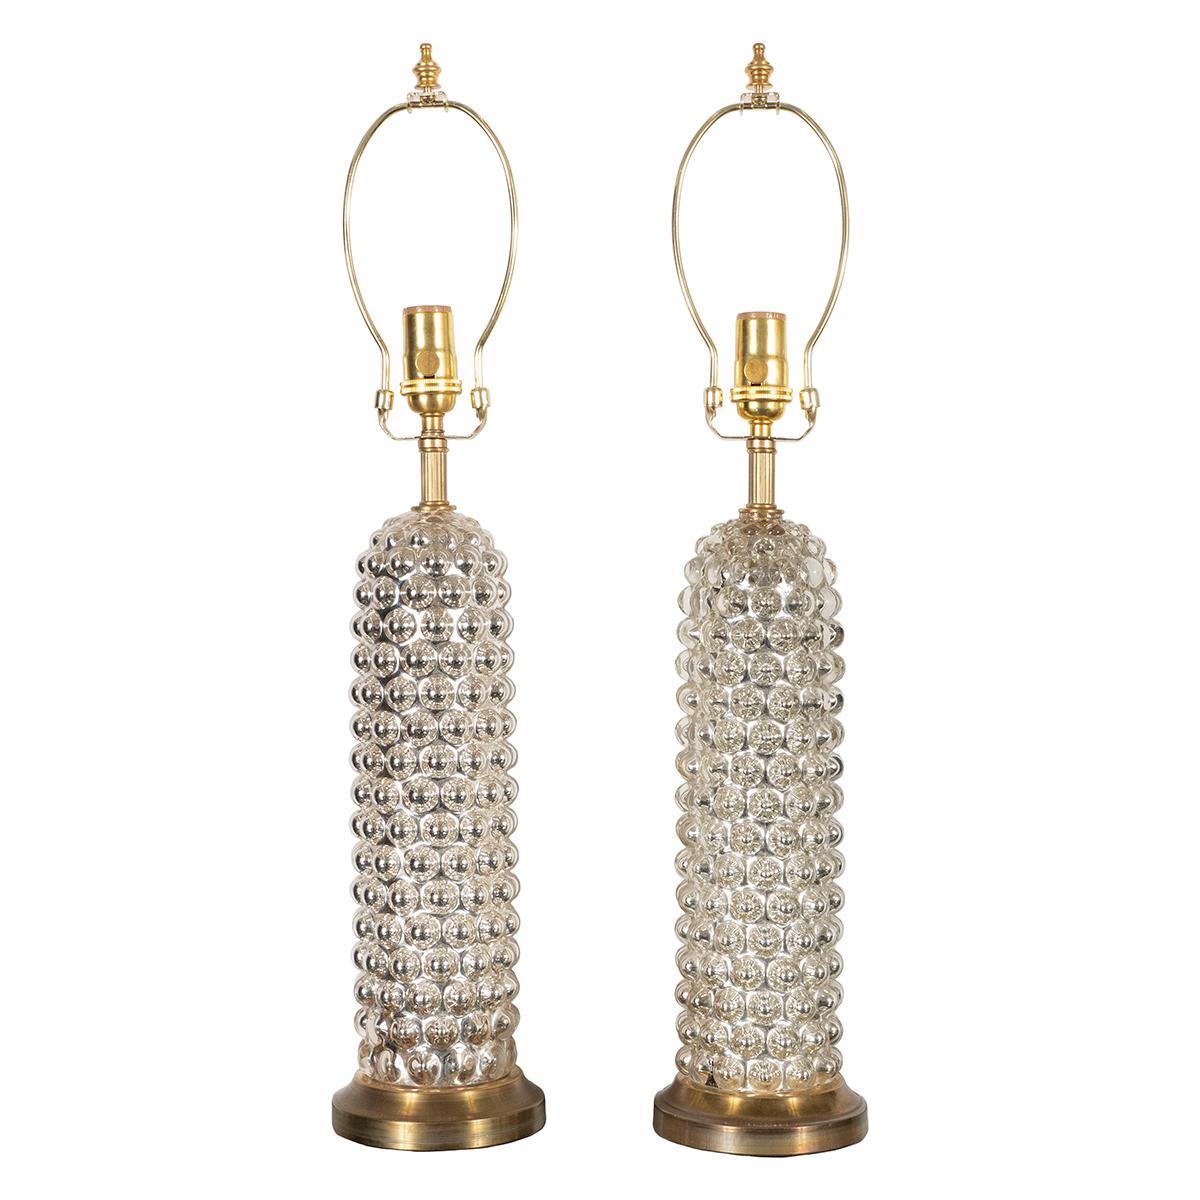 Pair of Mercury Glass Bubble Cylinder lamps.